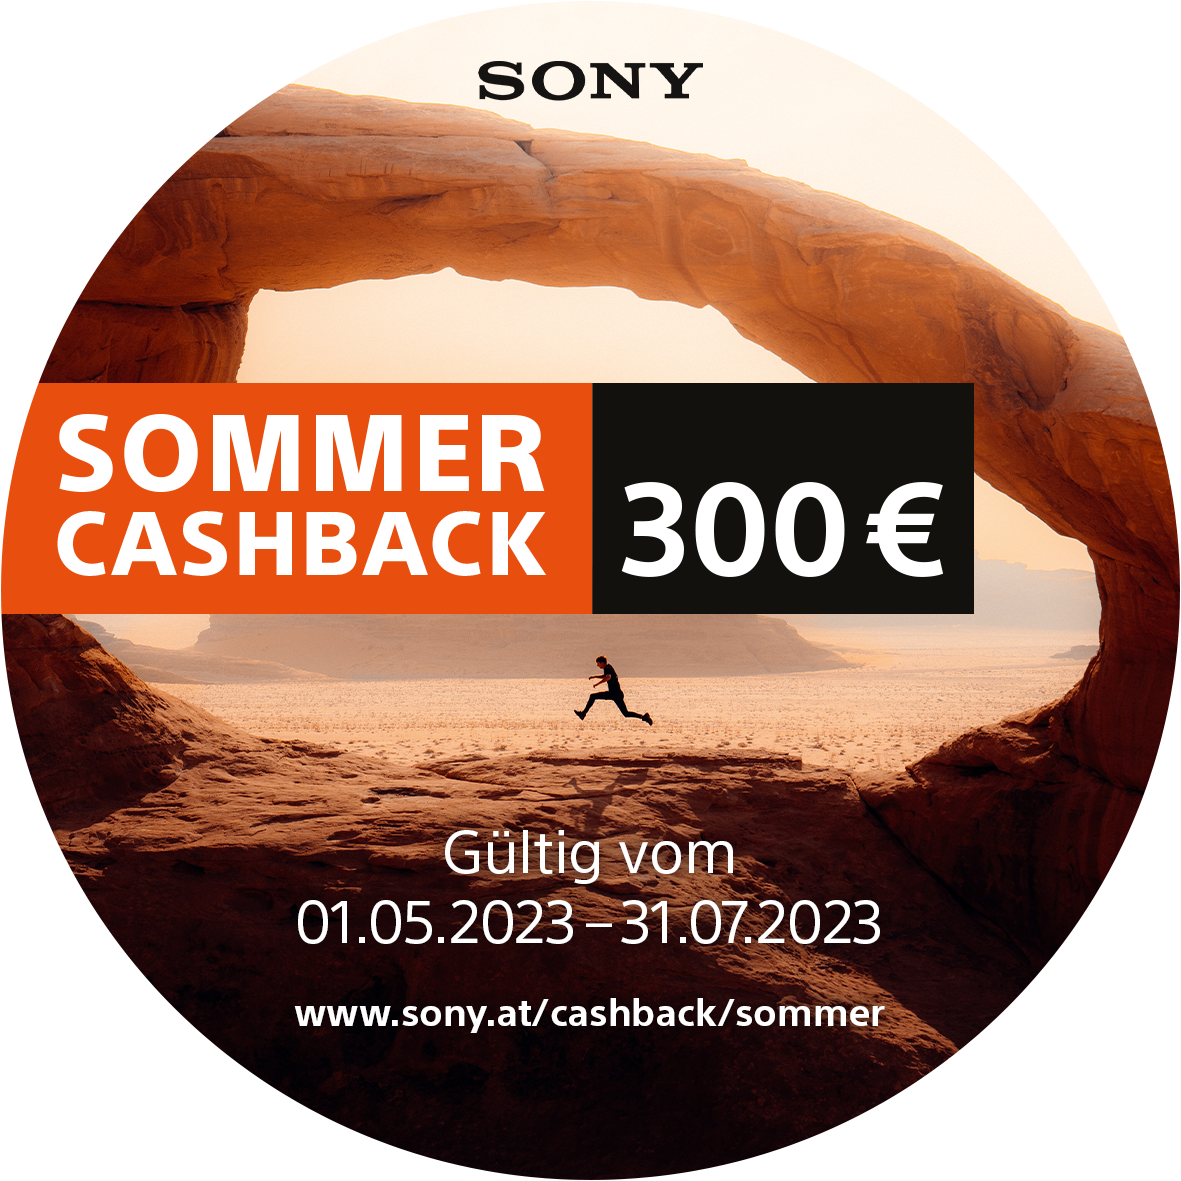 350 6 CHAT DI Sommer Cashback Online Button r4 ATDE 300